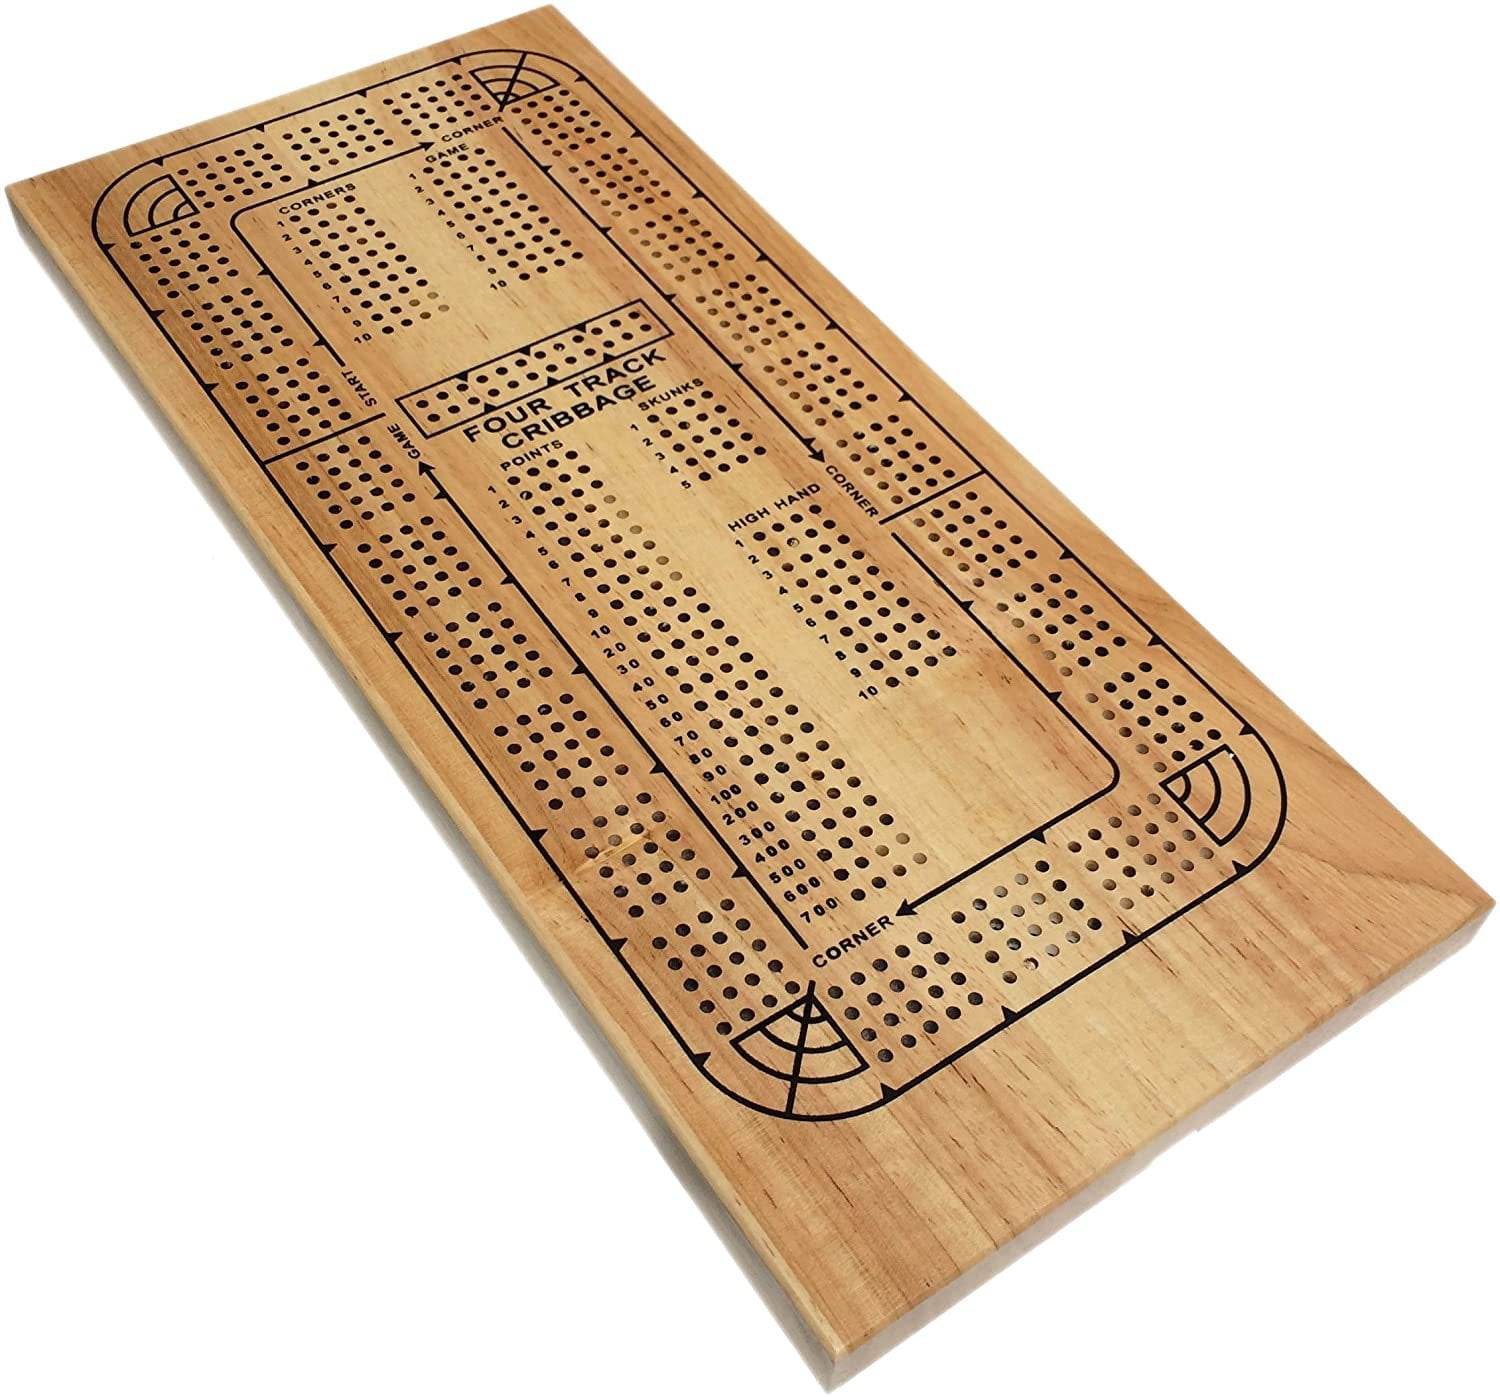 Bass Worthington Complete set Of Dominoes W Cribbage Board 